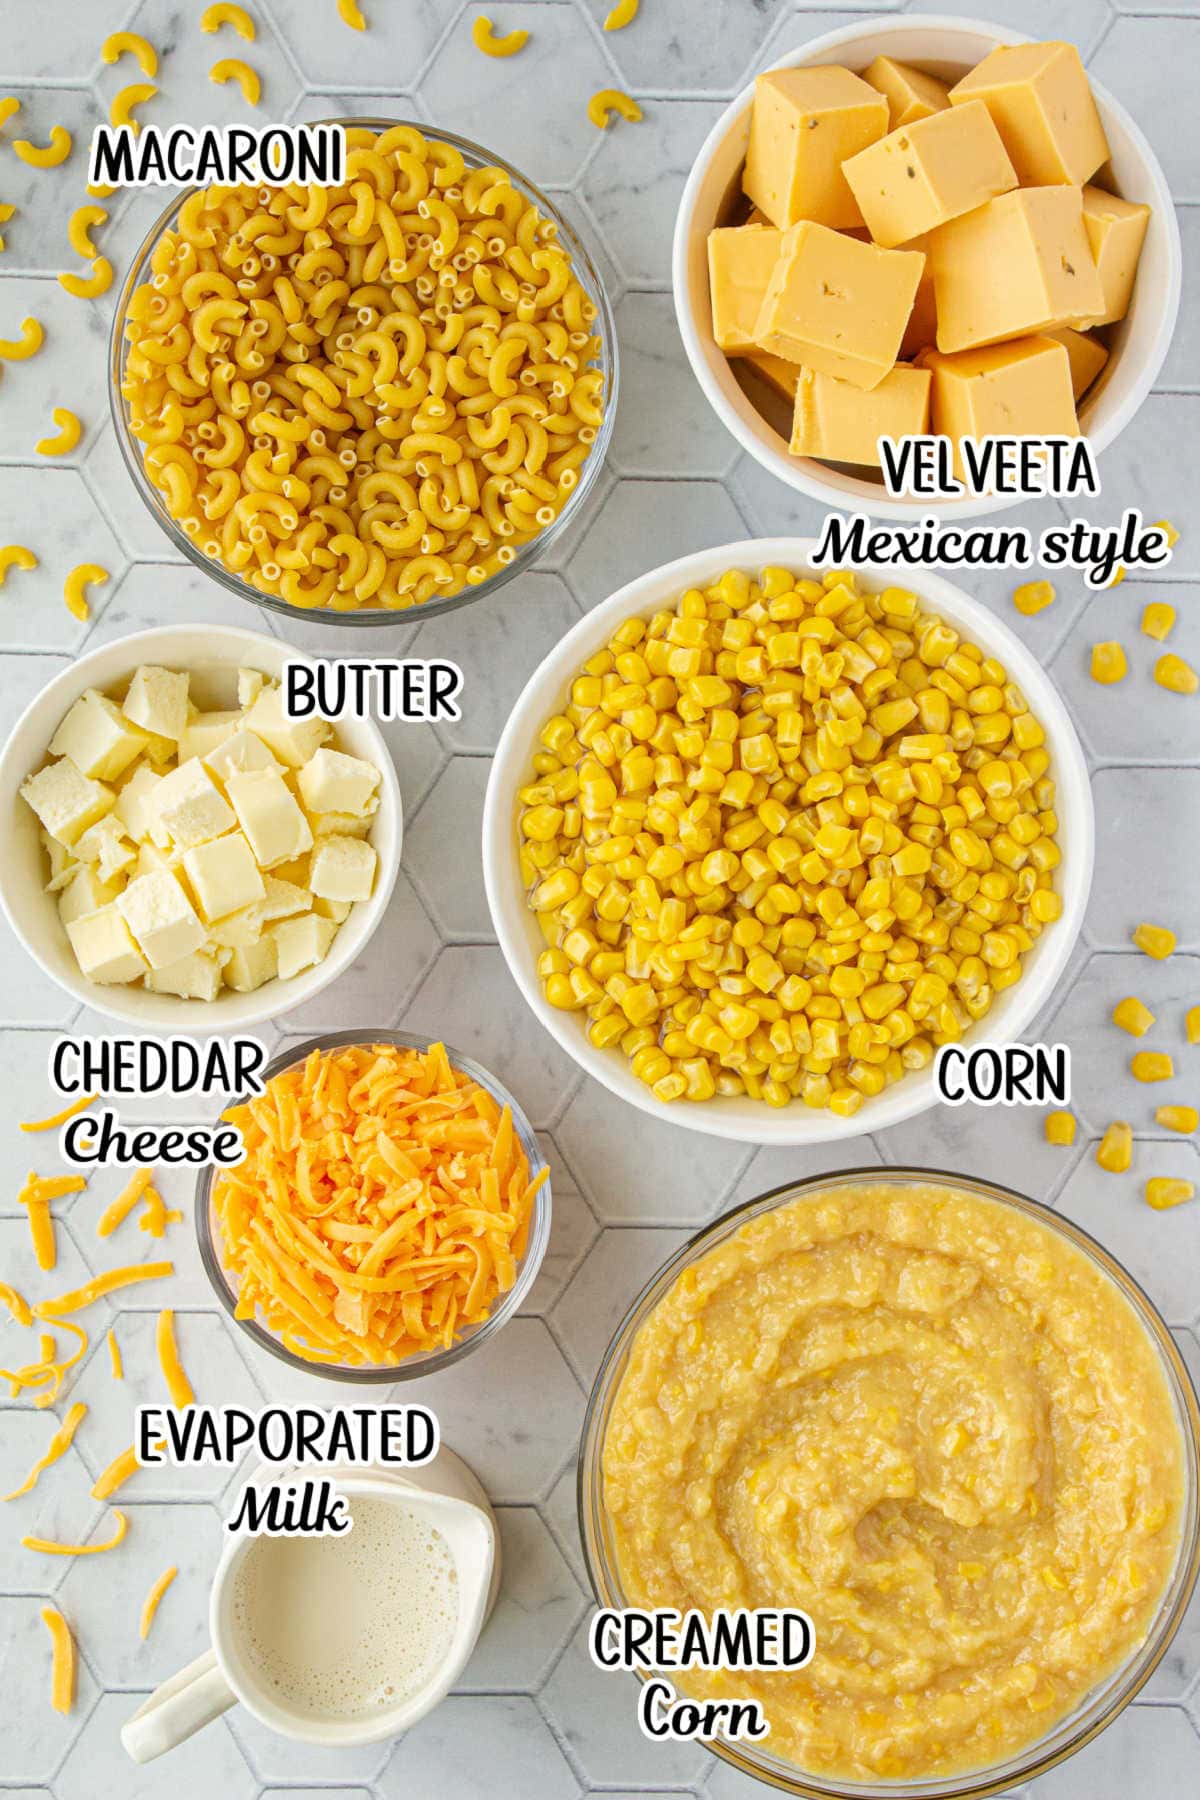 Labeled ingredients for the crock pot corn and macaroni casserole.